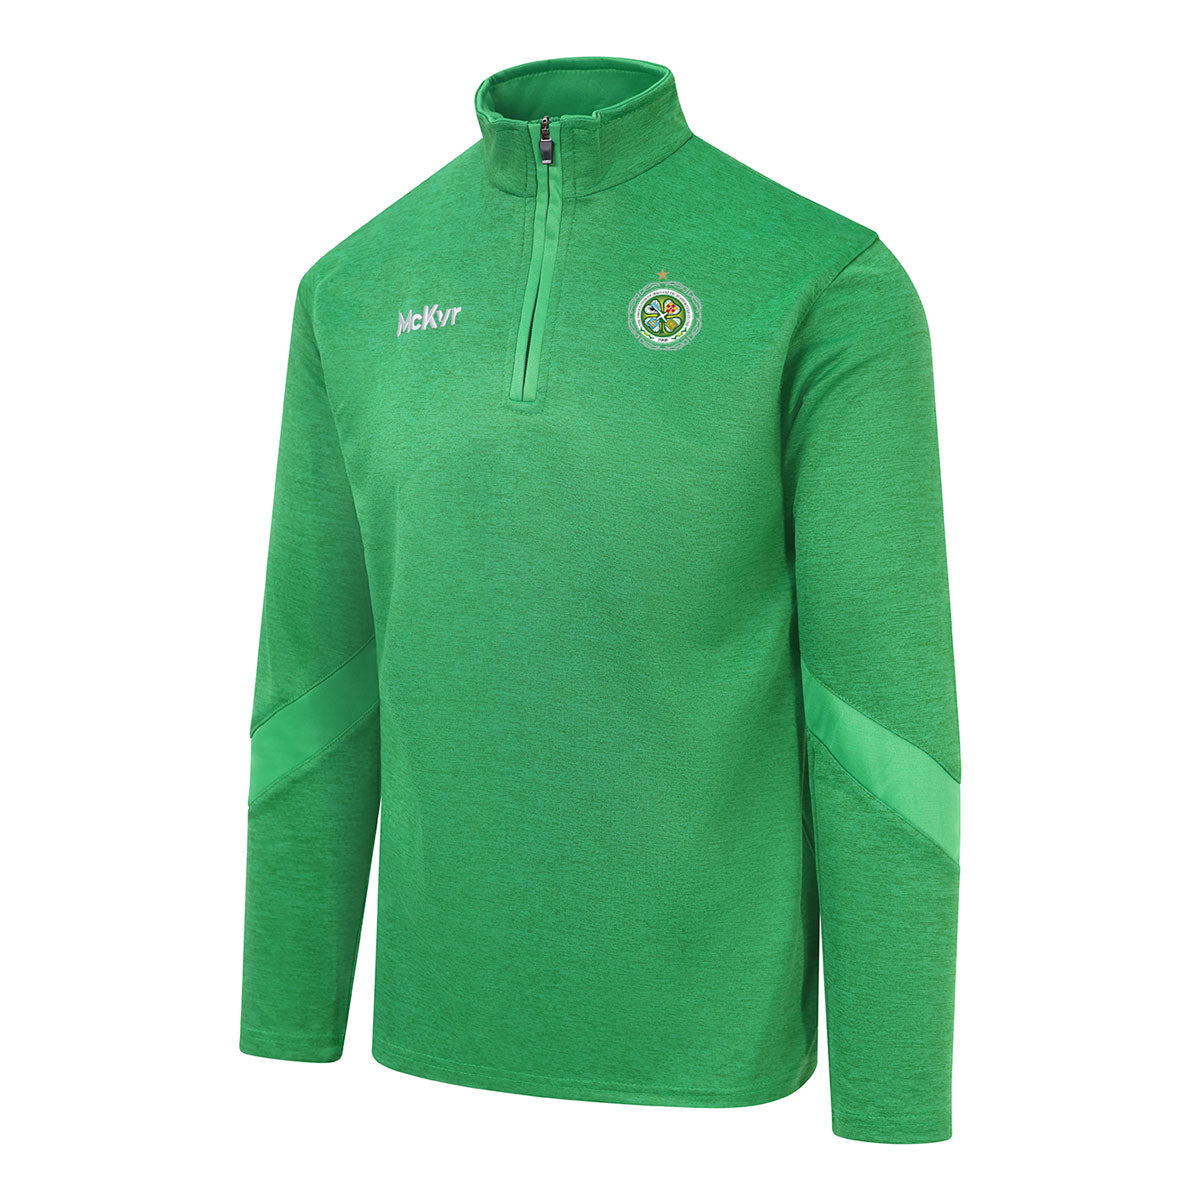 Mc Keever The Association of Irish Celtic Supporters Clubs Core 22 1/4 Zip Top - Youth - Green